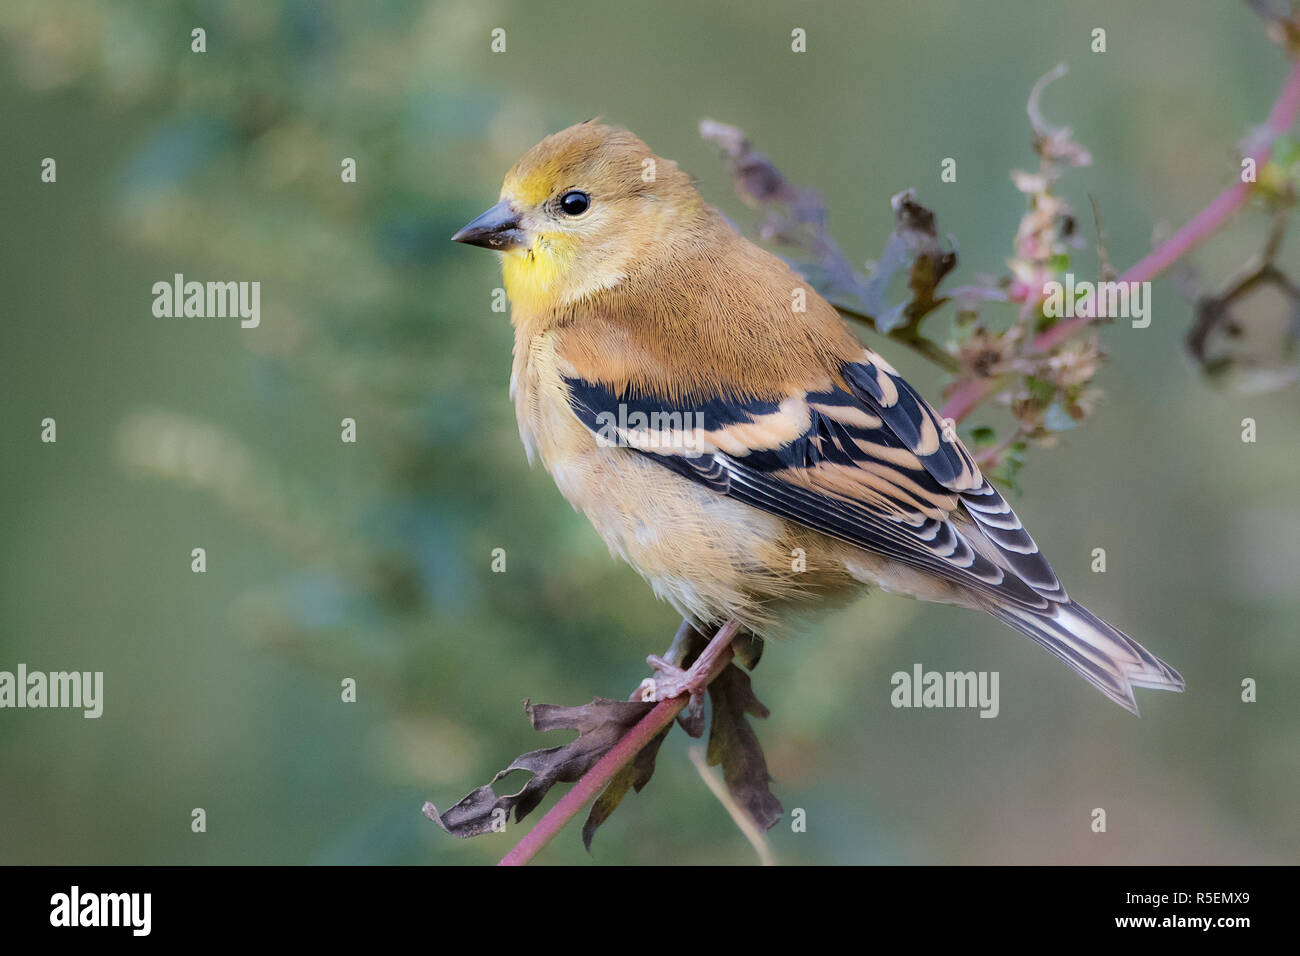 Perched American goldfinch in winter plumage Stock Photo